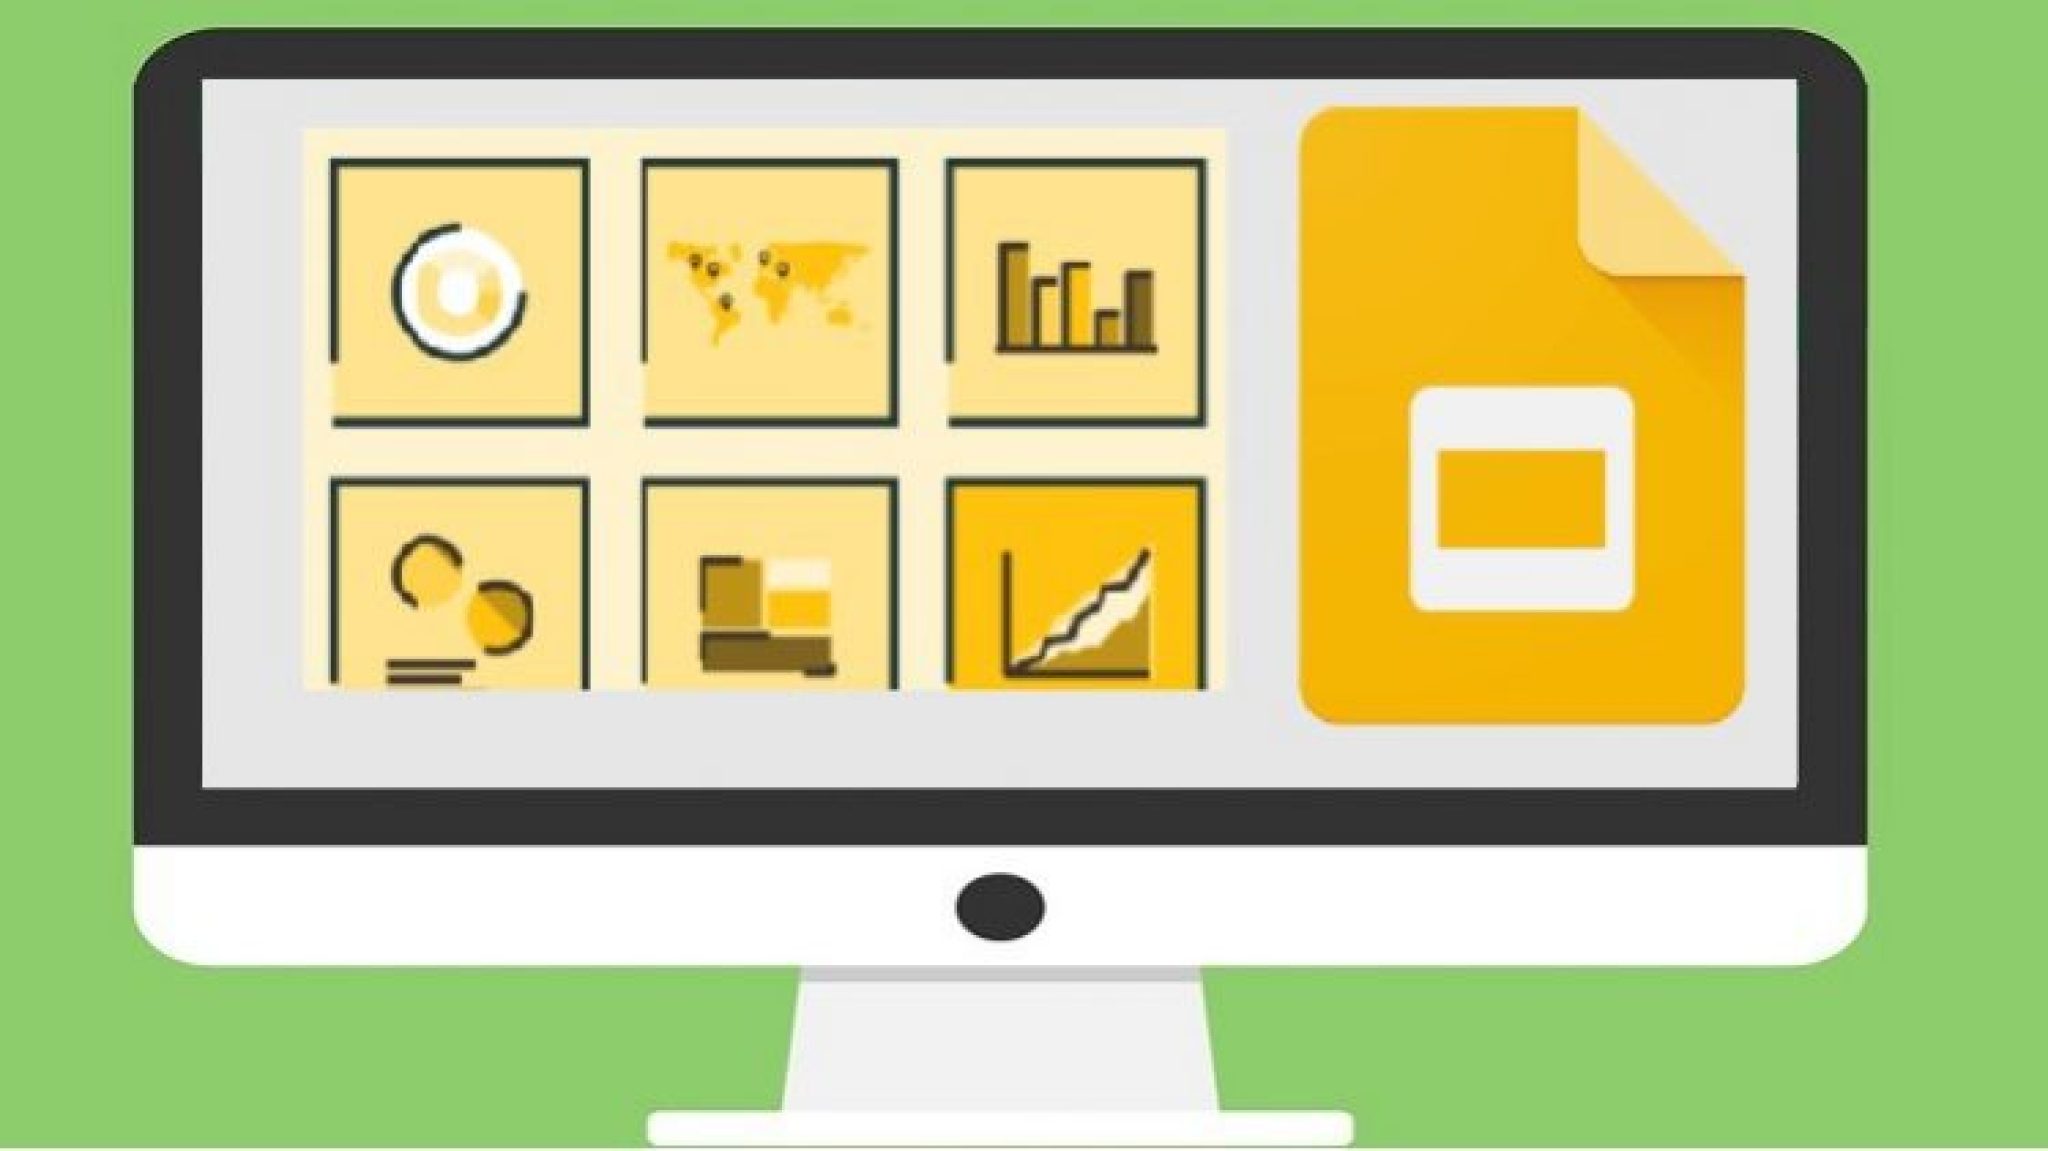  100 OFF The Complete Beginners Guide To Google Slides With 